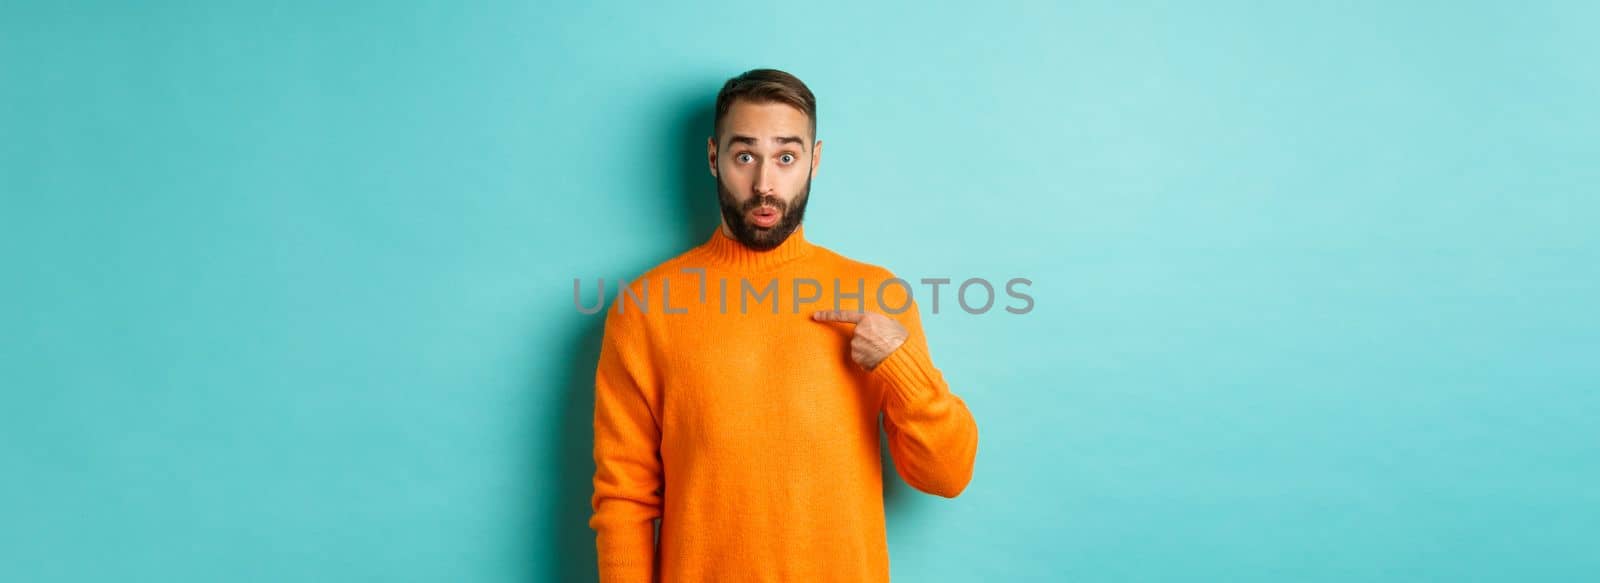 Man pointing at himself with surprise face, being chosen, standing confused against light blue background.